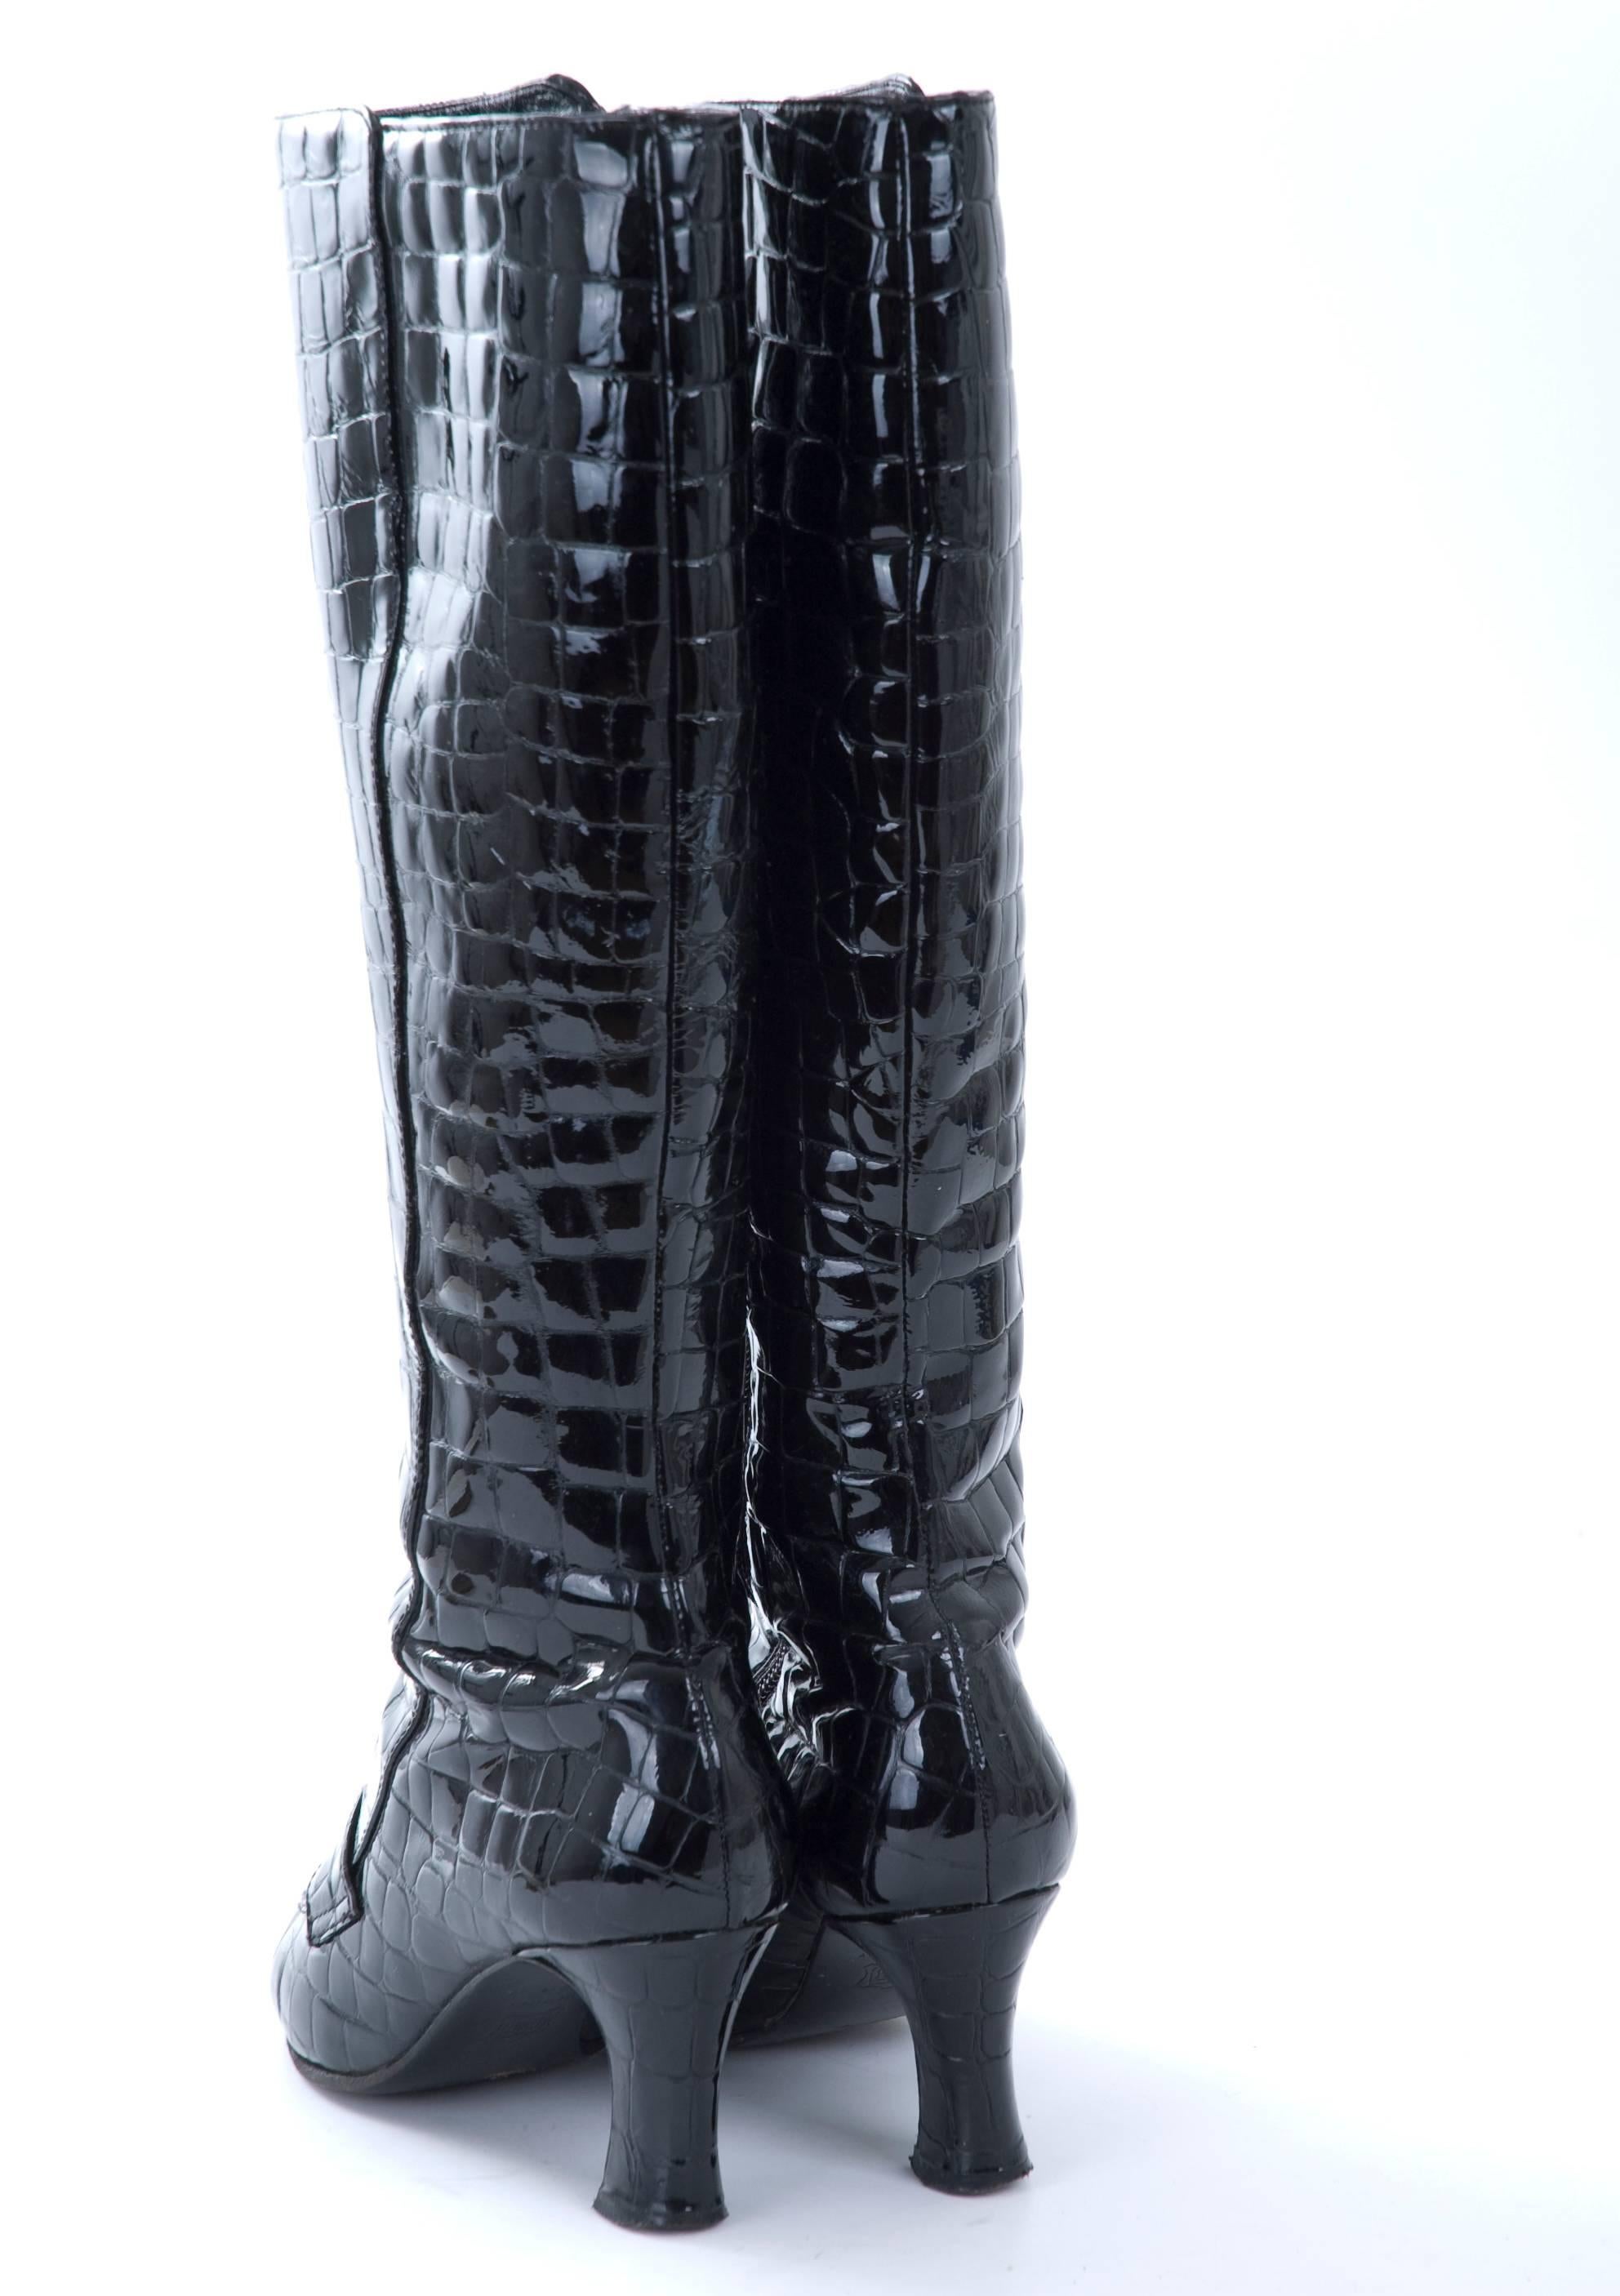 Women's Vintage 80s Black GIANNI VERSACE Crocodile Pattern Leather Boots with Medusa